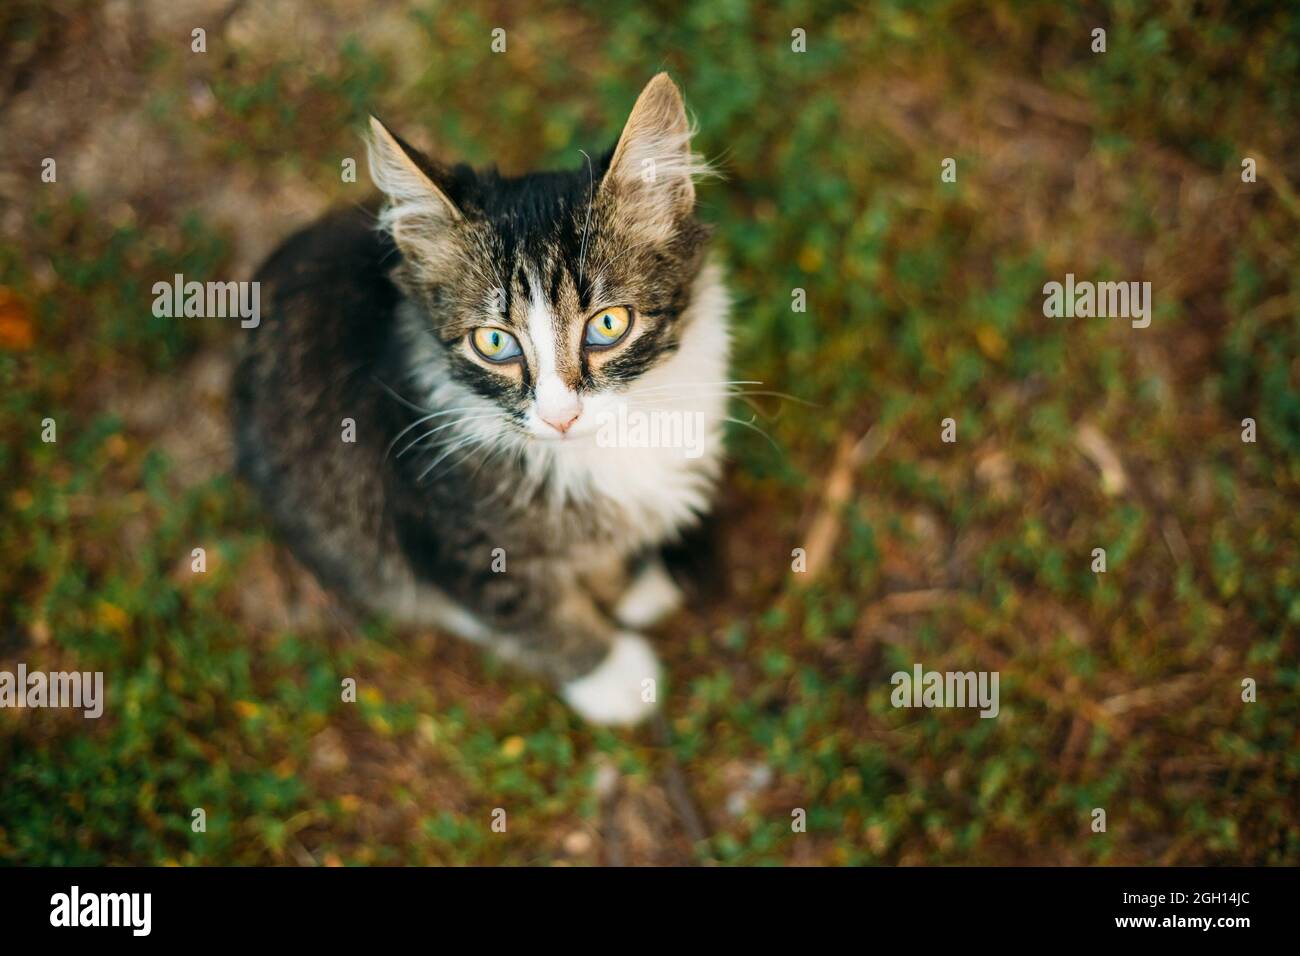 Small Cat Kitten Looking Up from Green Spring Grass. Stock Photo